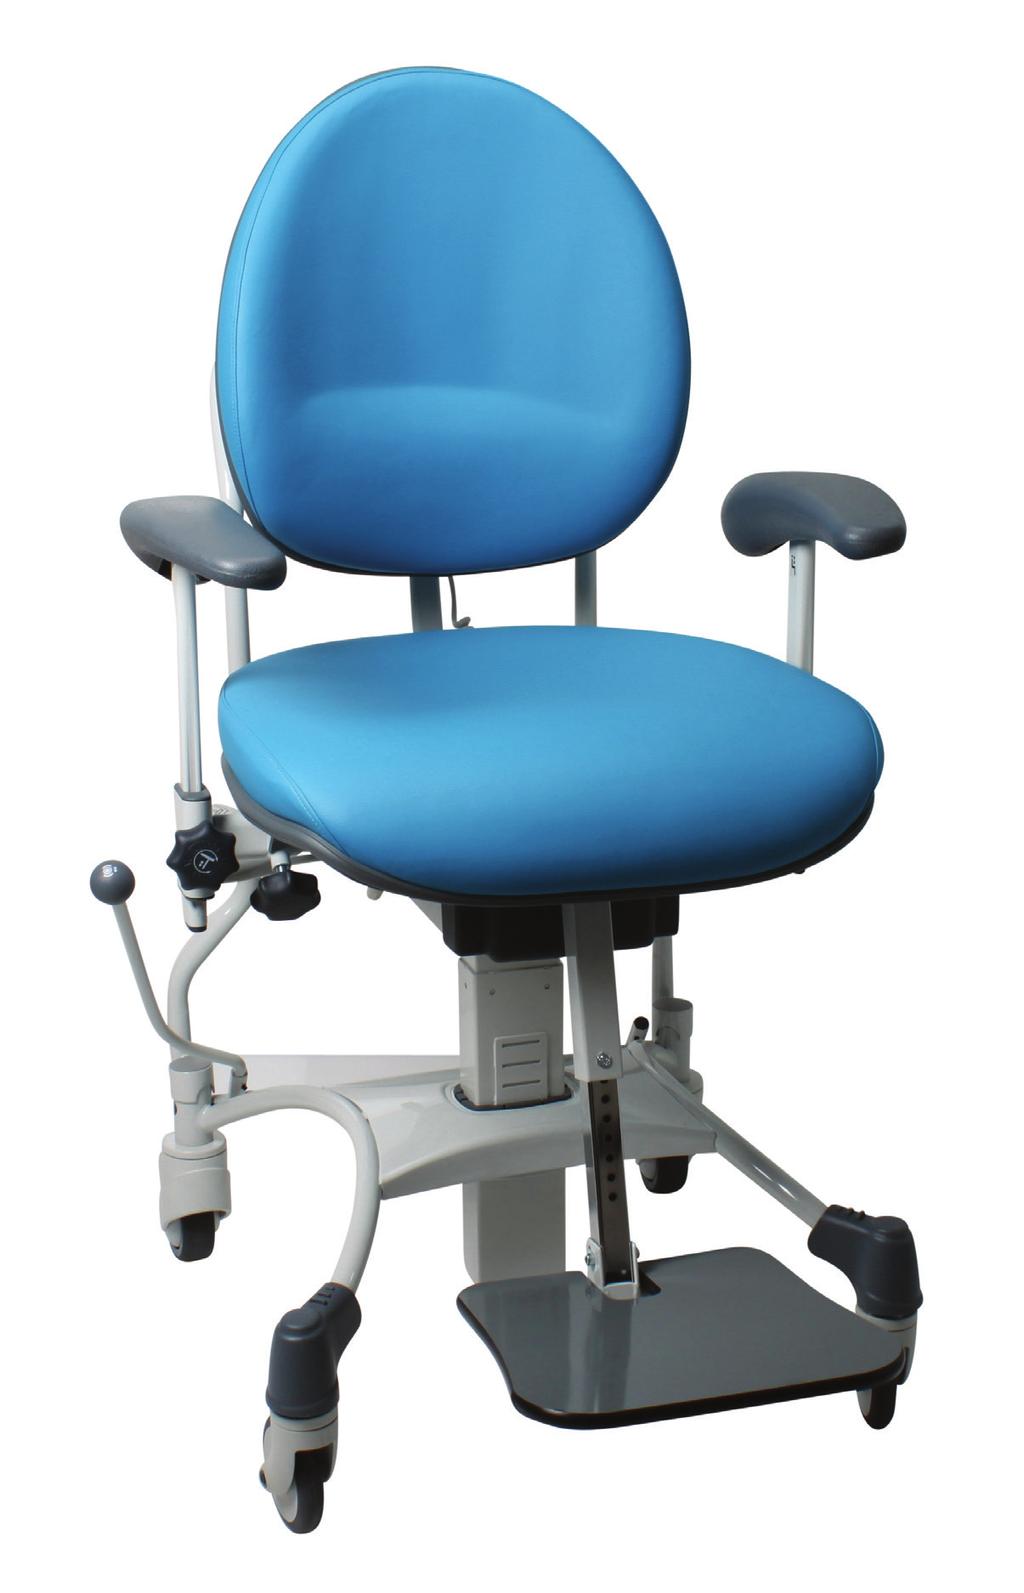 Poppy 774 AL Peacock 770 Jet 776 Grass 775 Ivory 773 Black 771 Meteor 777 Artesian 772 VELA Mammography Chair 160Kg Designed to provide a safe and efficient examination facility for the benefit of